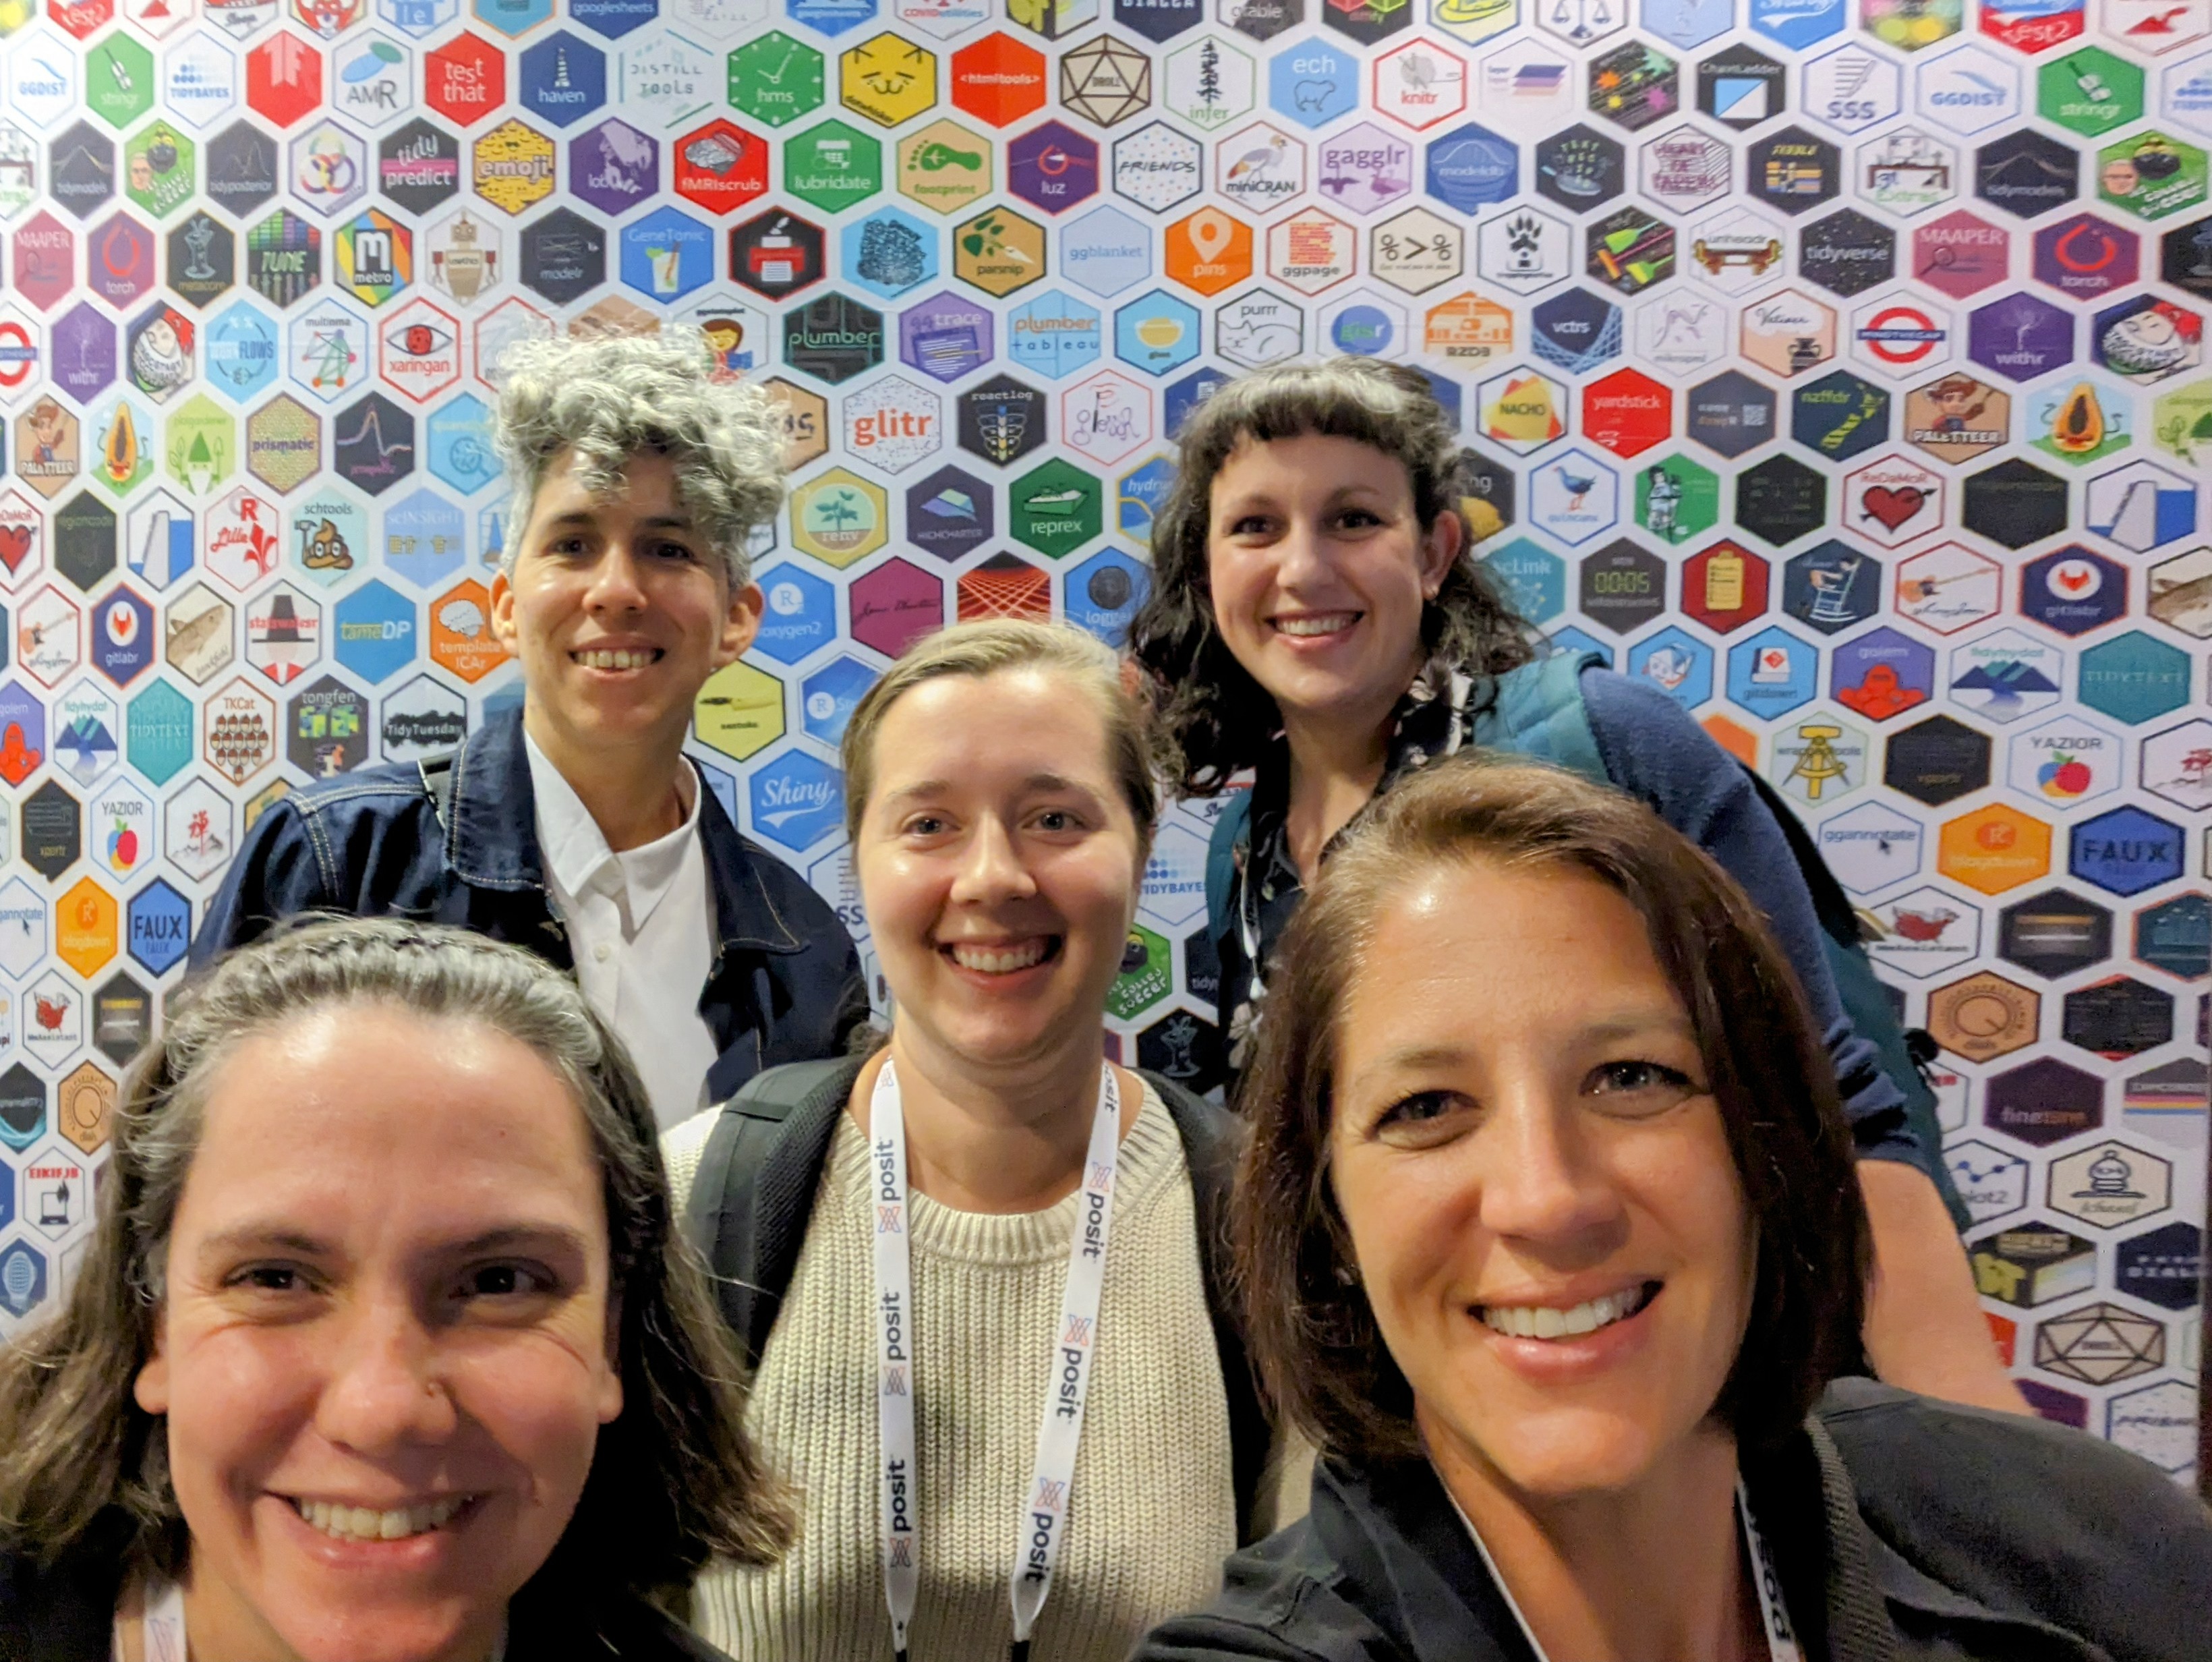 5 women standing together taking a selfie in front of a wall full of hex stickers.